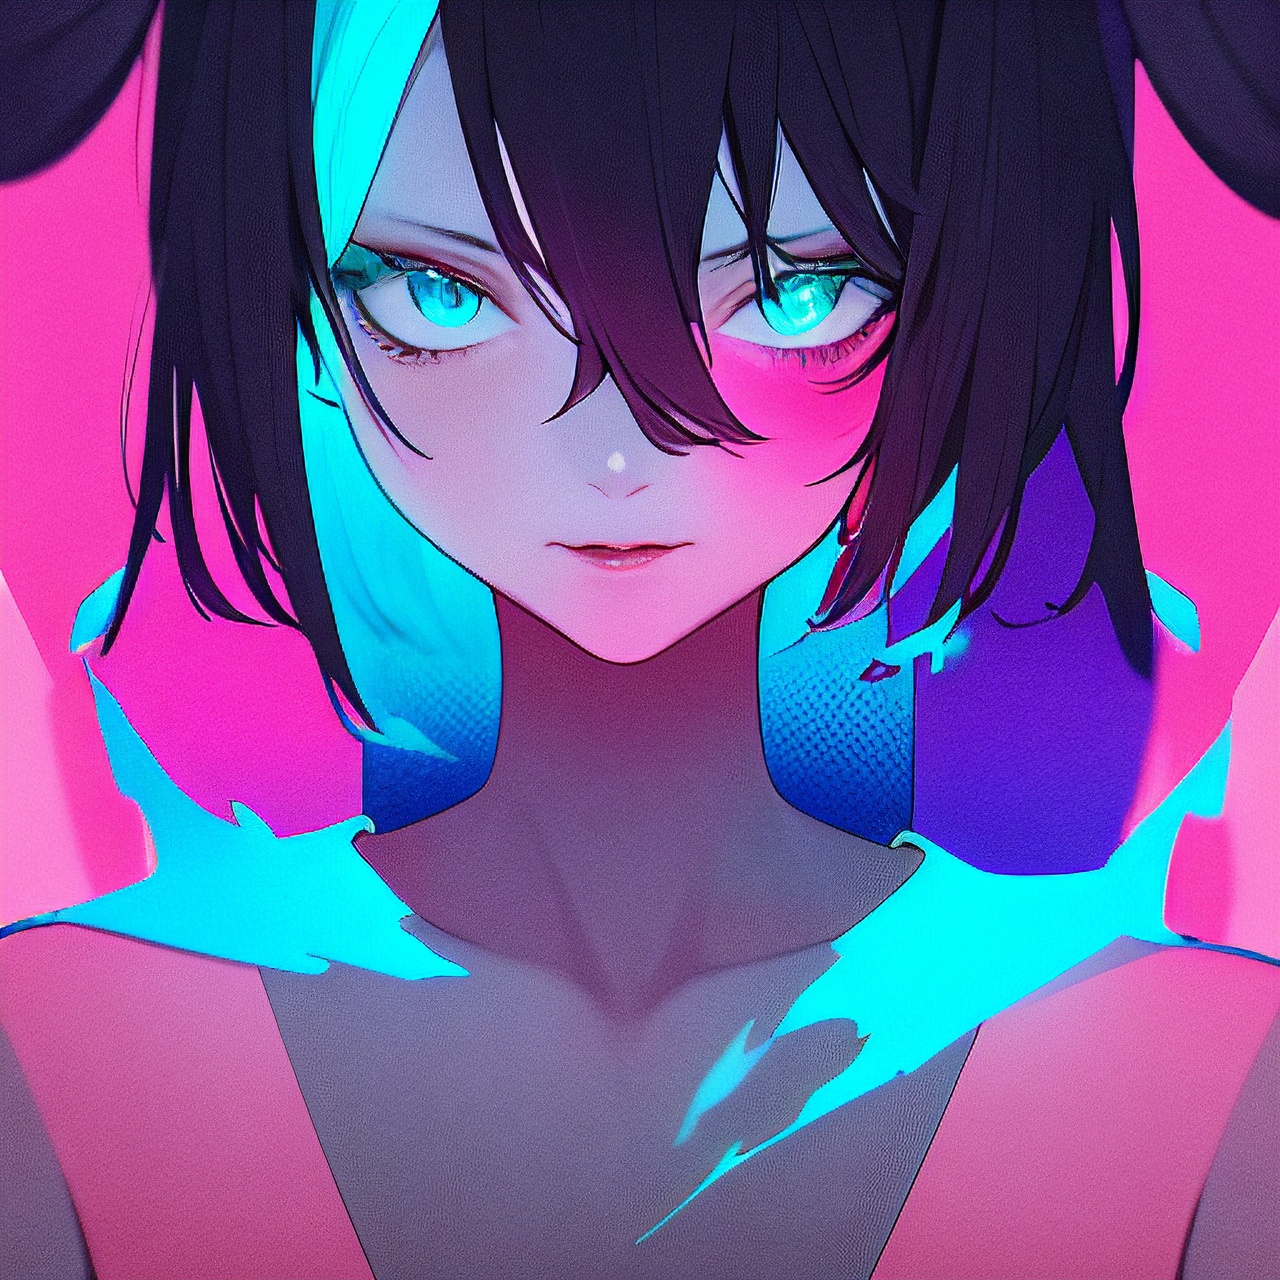 masterpiece, best quality, ultra detailed, Produce a surreal image of a person merging with a virtual world, using a neon color palette of pinks and blues